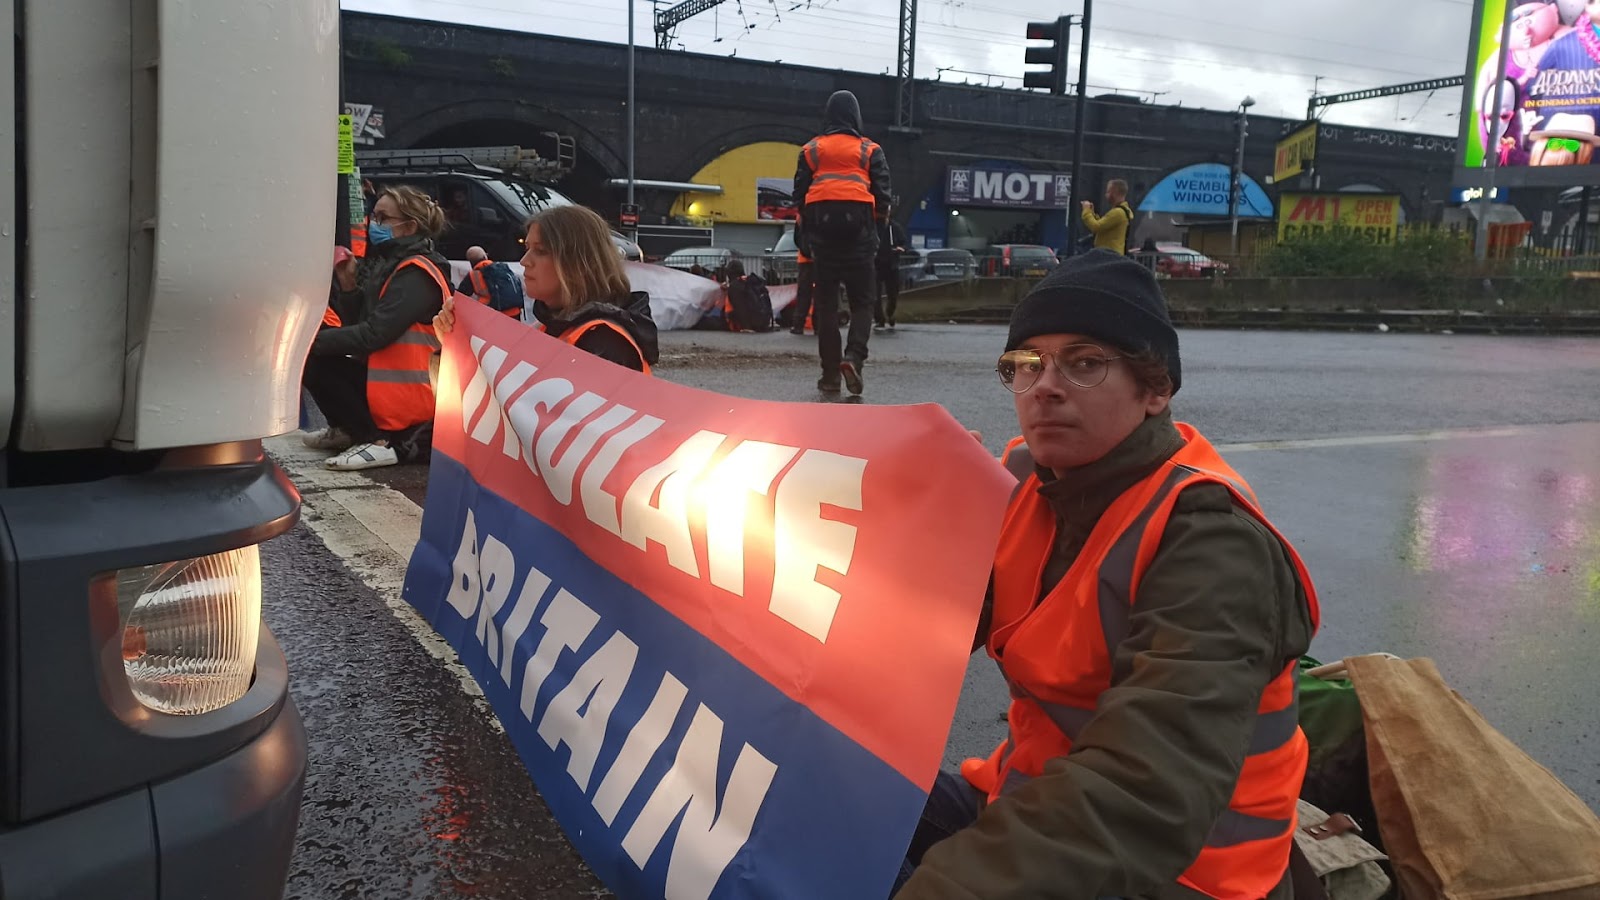 A young protester kneels on a road holding an insulate britain banner. A huge whie lorry is parked right in front of him. He looks to camera.